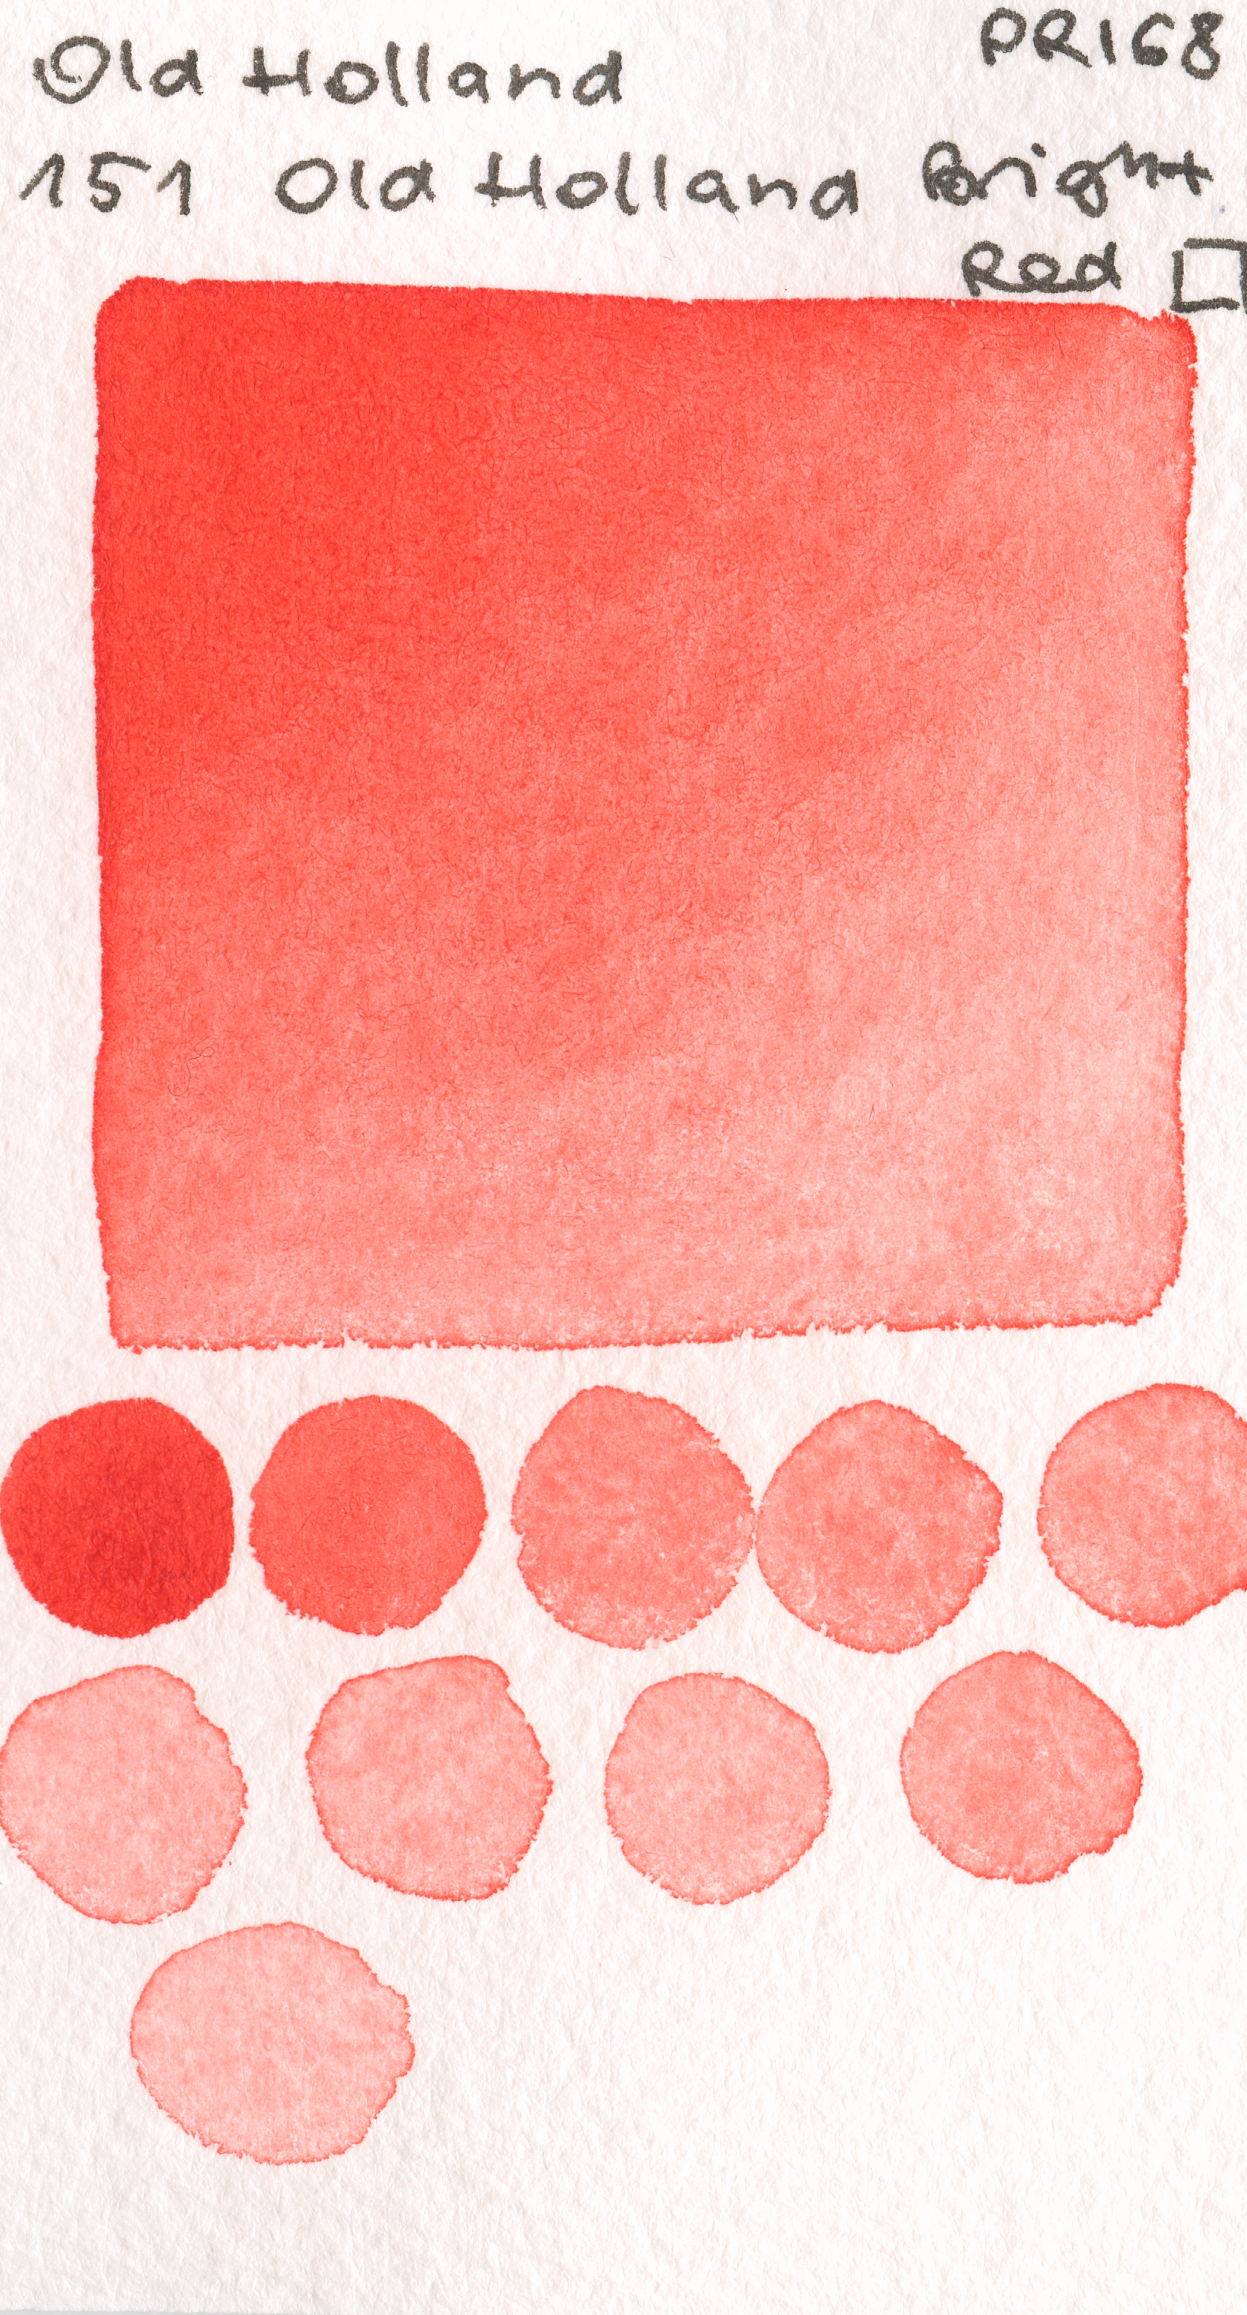 Old Holland Classic Watercolours 151 Old Holland Bright Red PR168 watercolor swatch